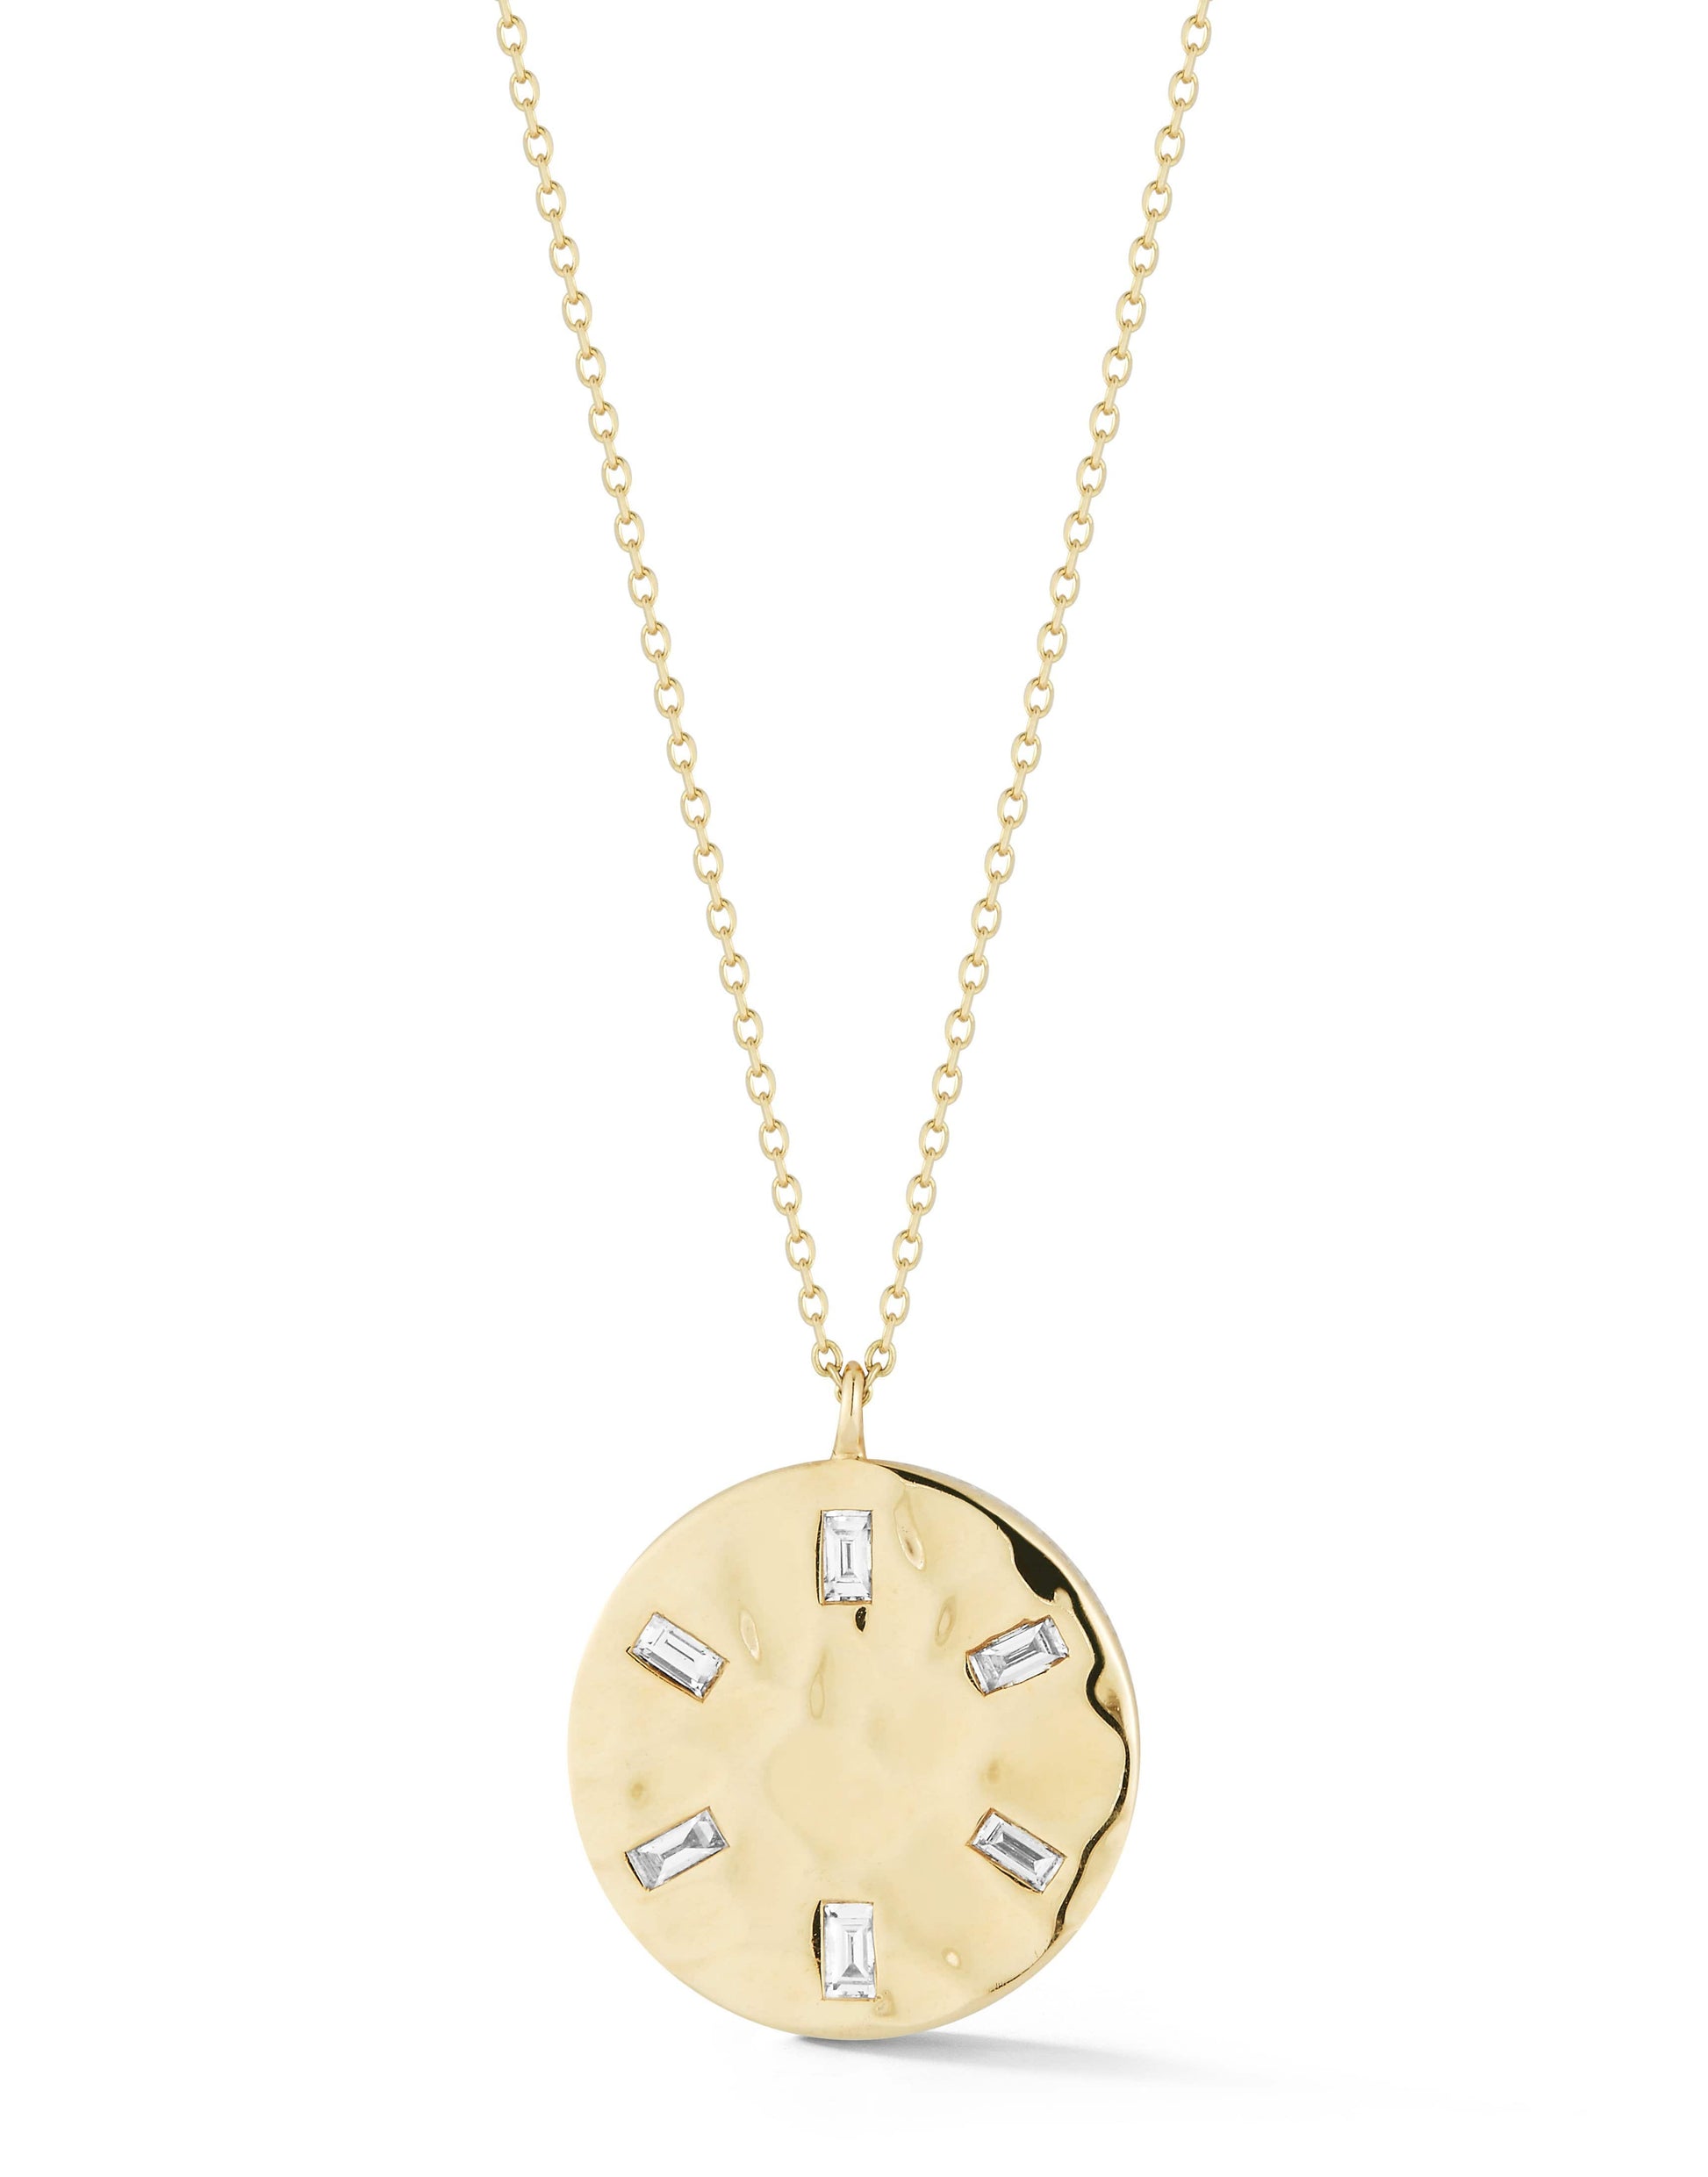 DANA REBECCA DESIGNS-Cynthia Rose Hammered Disc Necklace-YELLOW GOLD